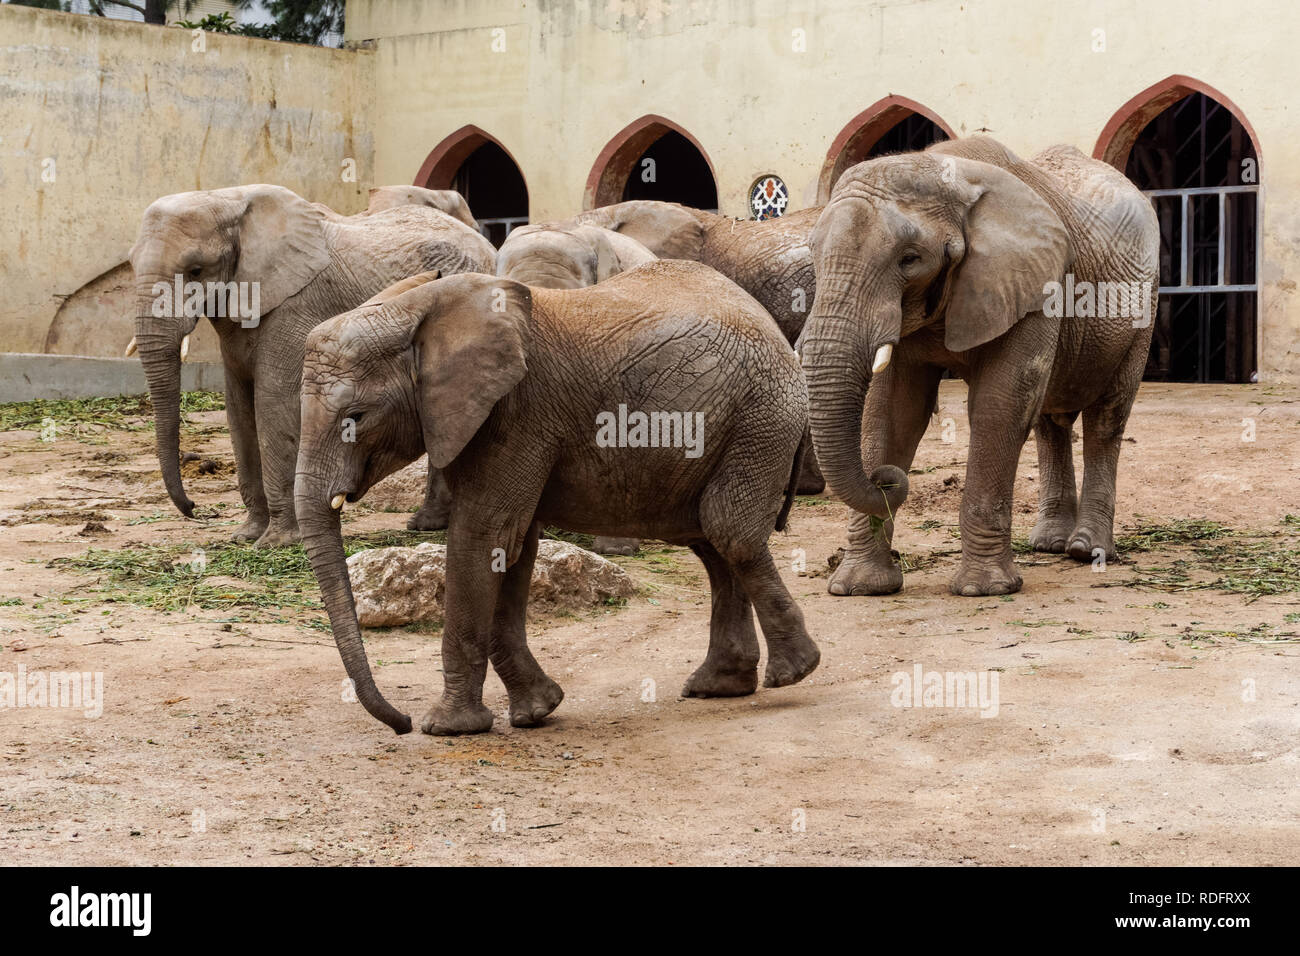 African elephants at Lisbon Zoo, Portugal Stock Photo